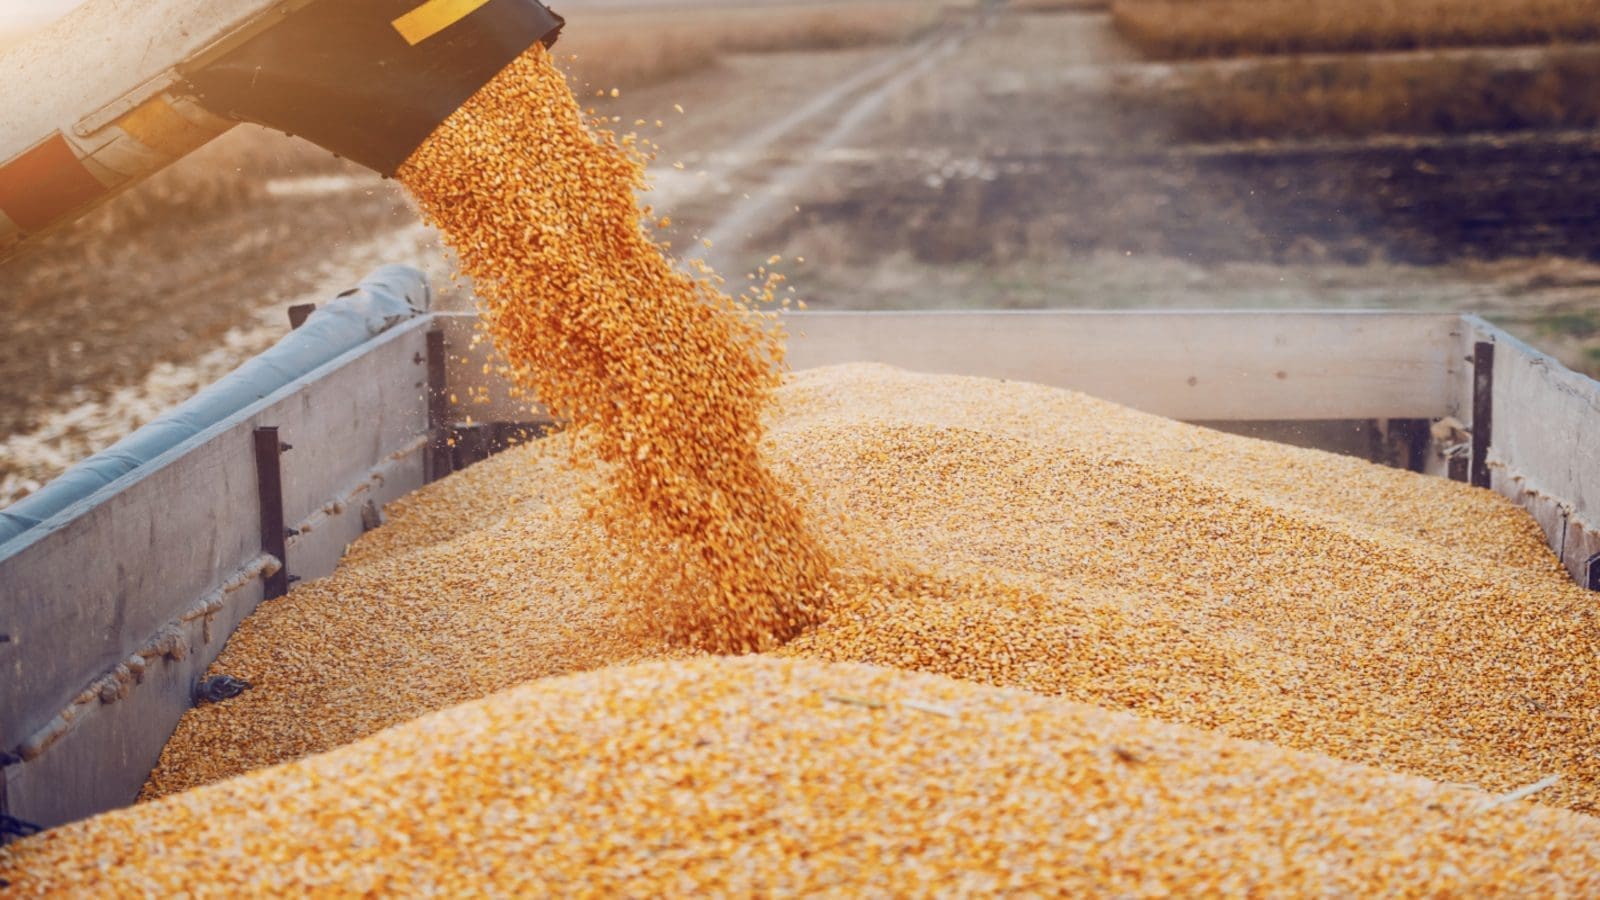 China renews appetite for Brazilian corn in push to diversify away from US and Ukraine